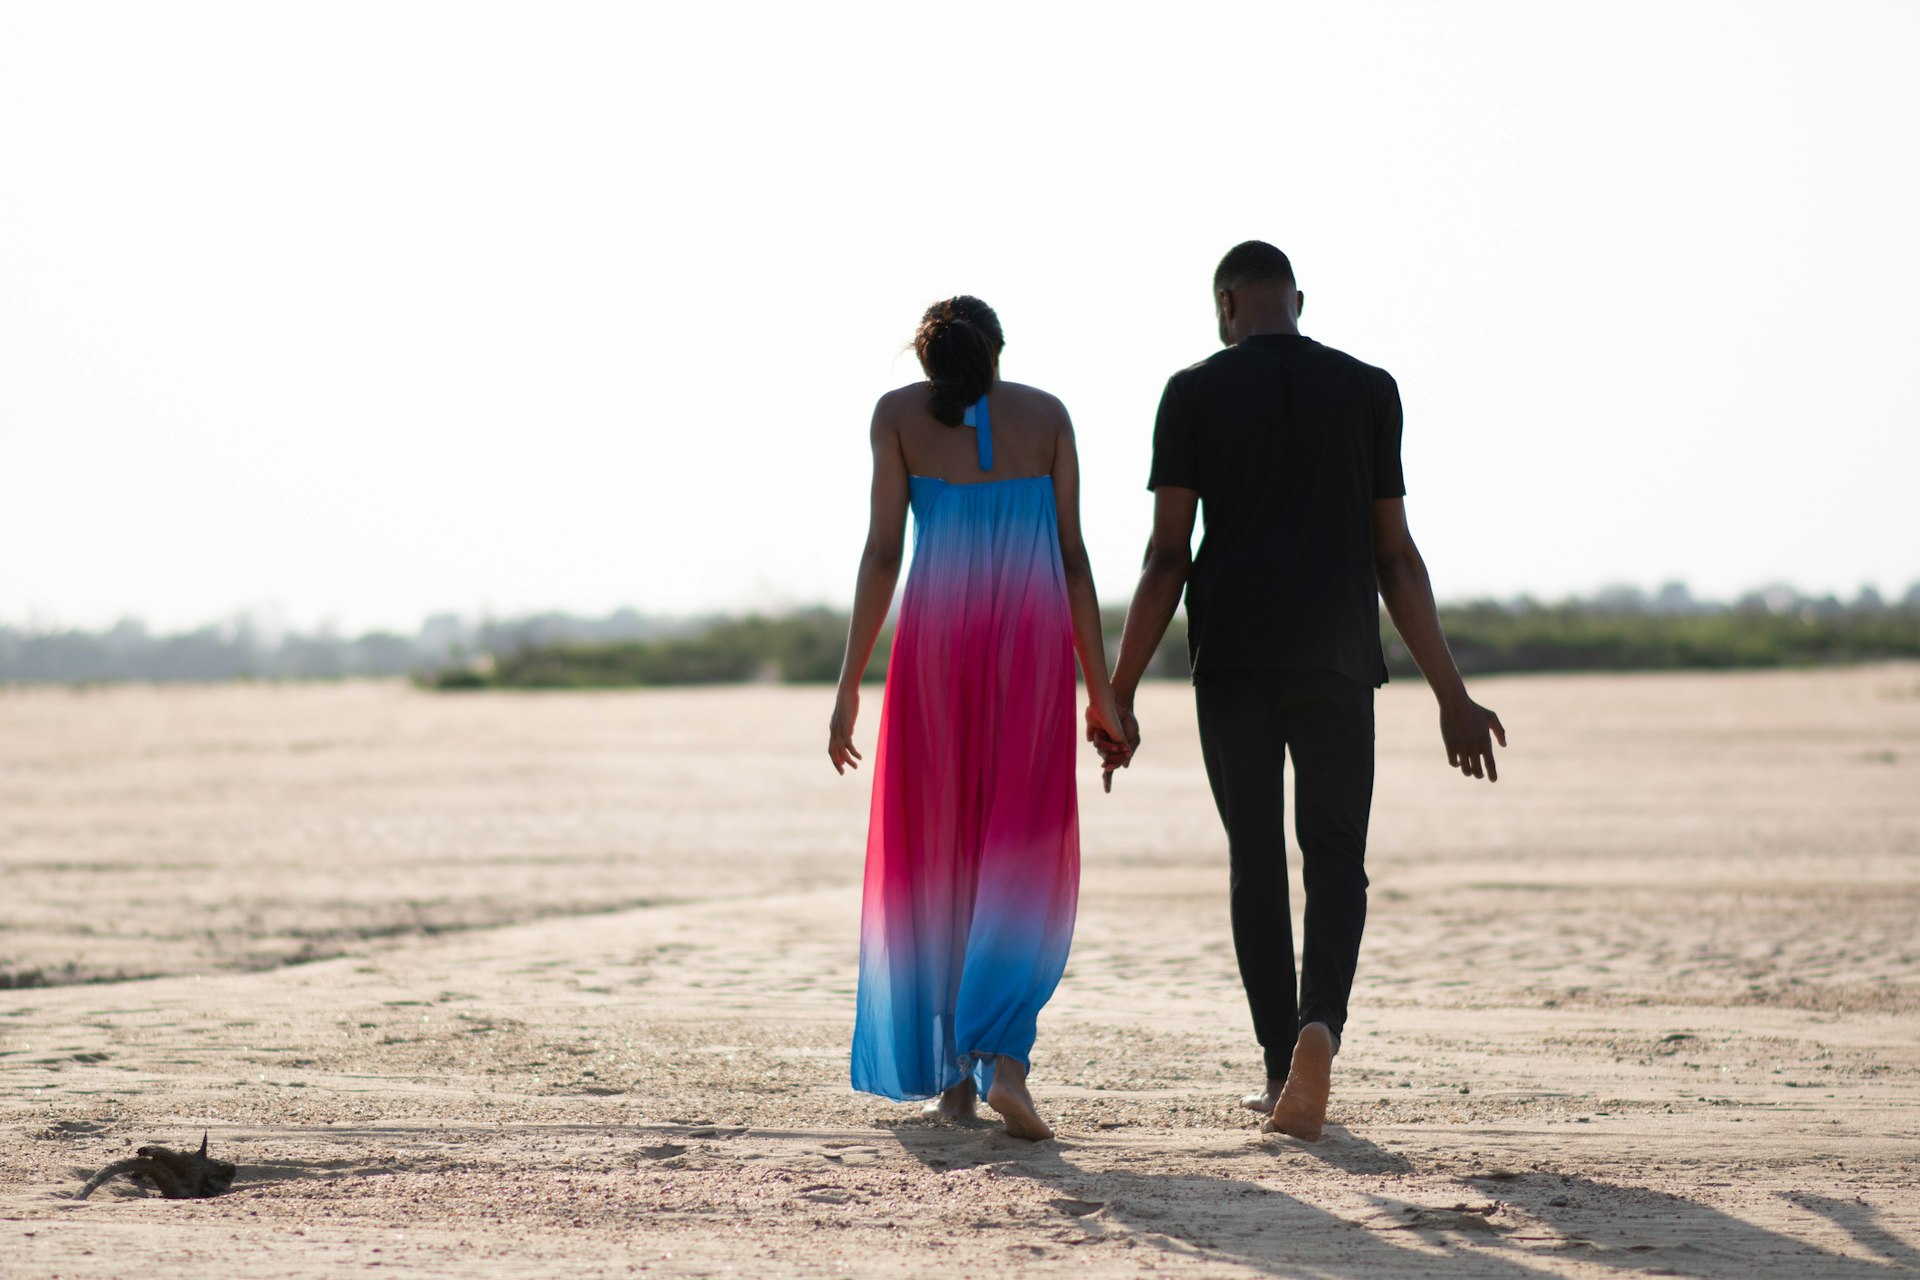 A couple walking barefoot on a beach in Nigeria